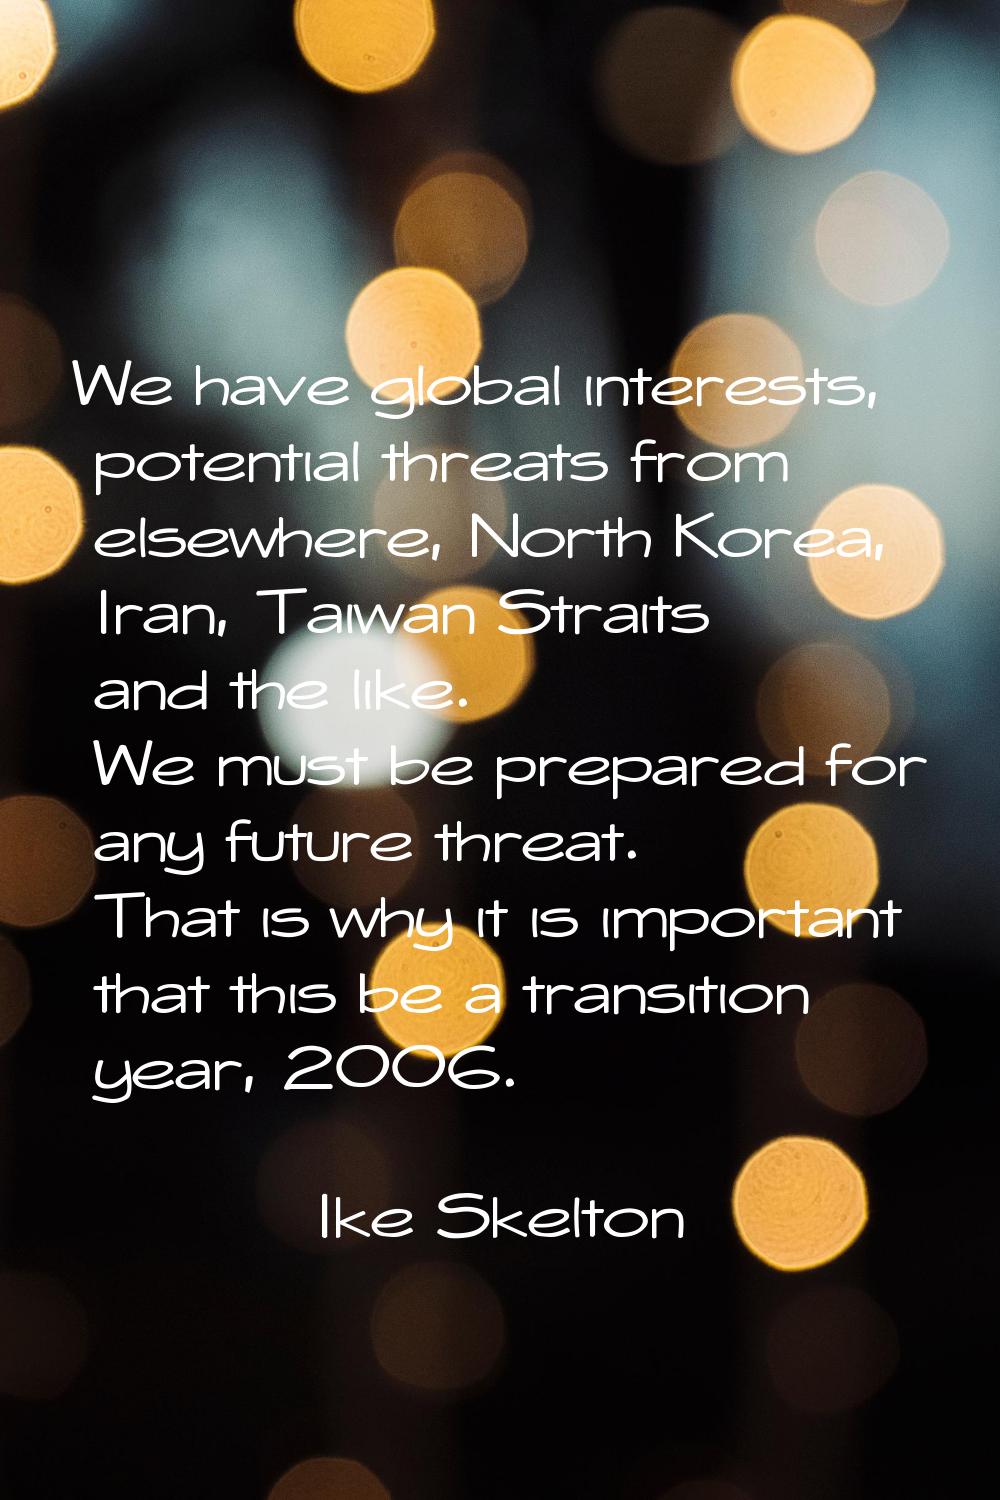 We have global interests, potential threats from elsewhere, North Korea, Iran, Taiwan Straits and t